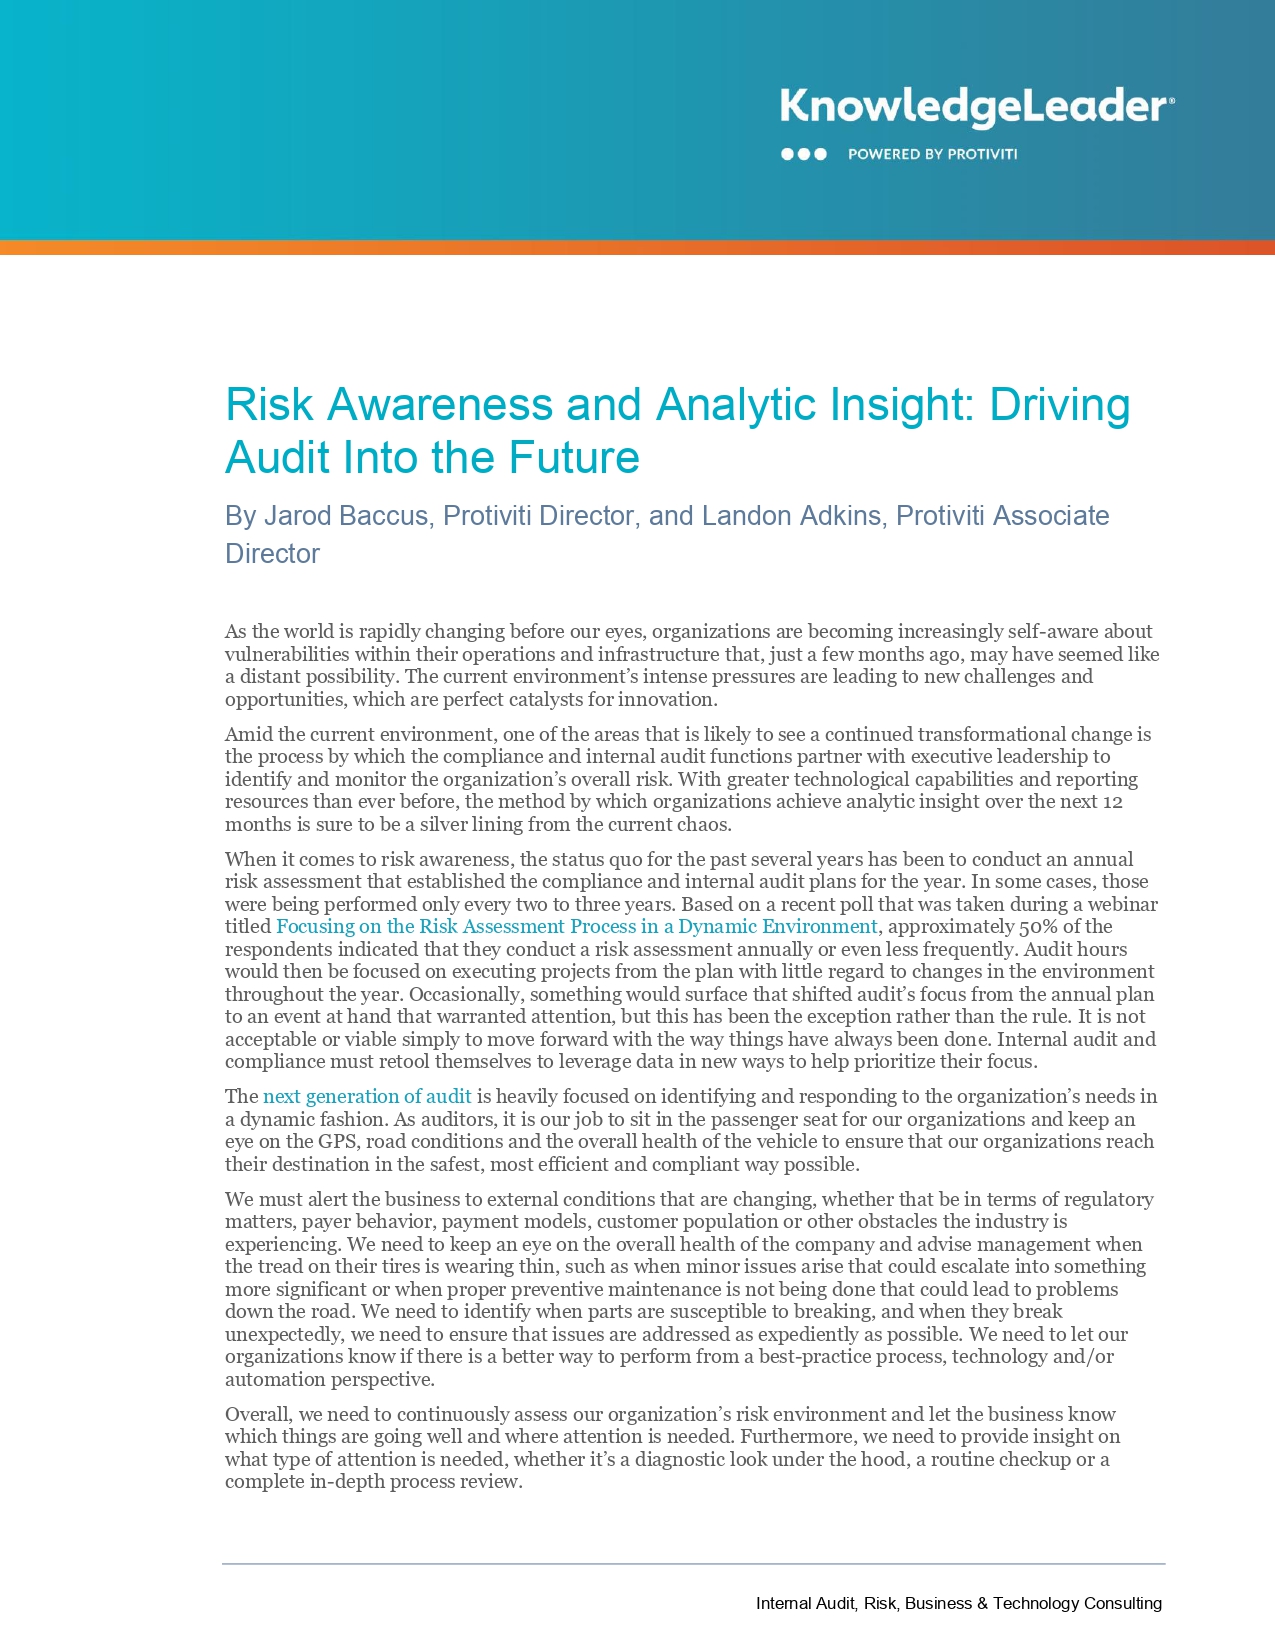 Risk Awareness and Analytic Insight Driving Audit Into the Future